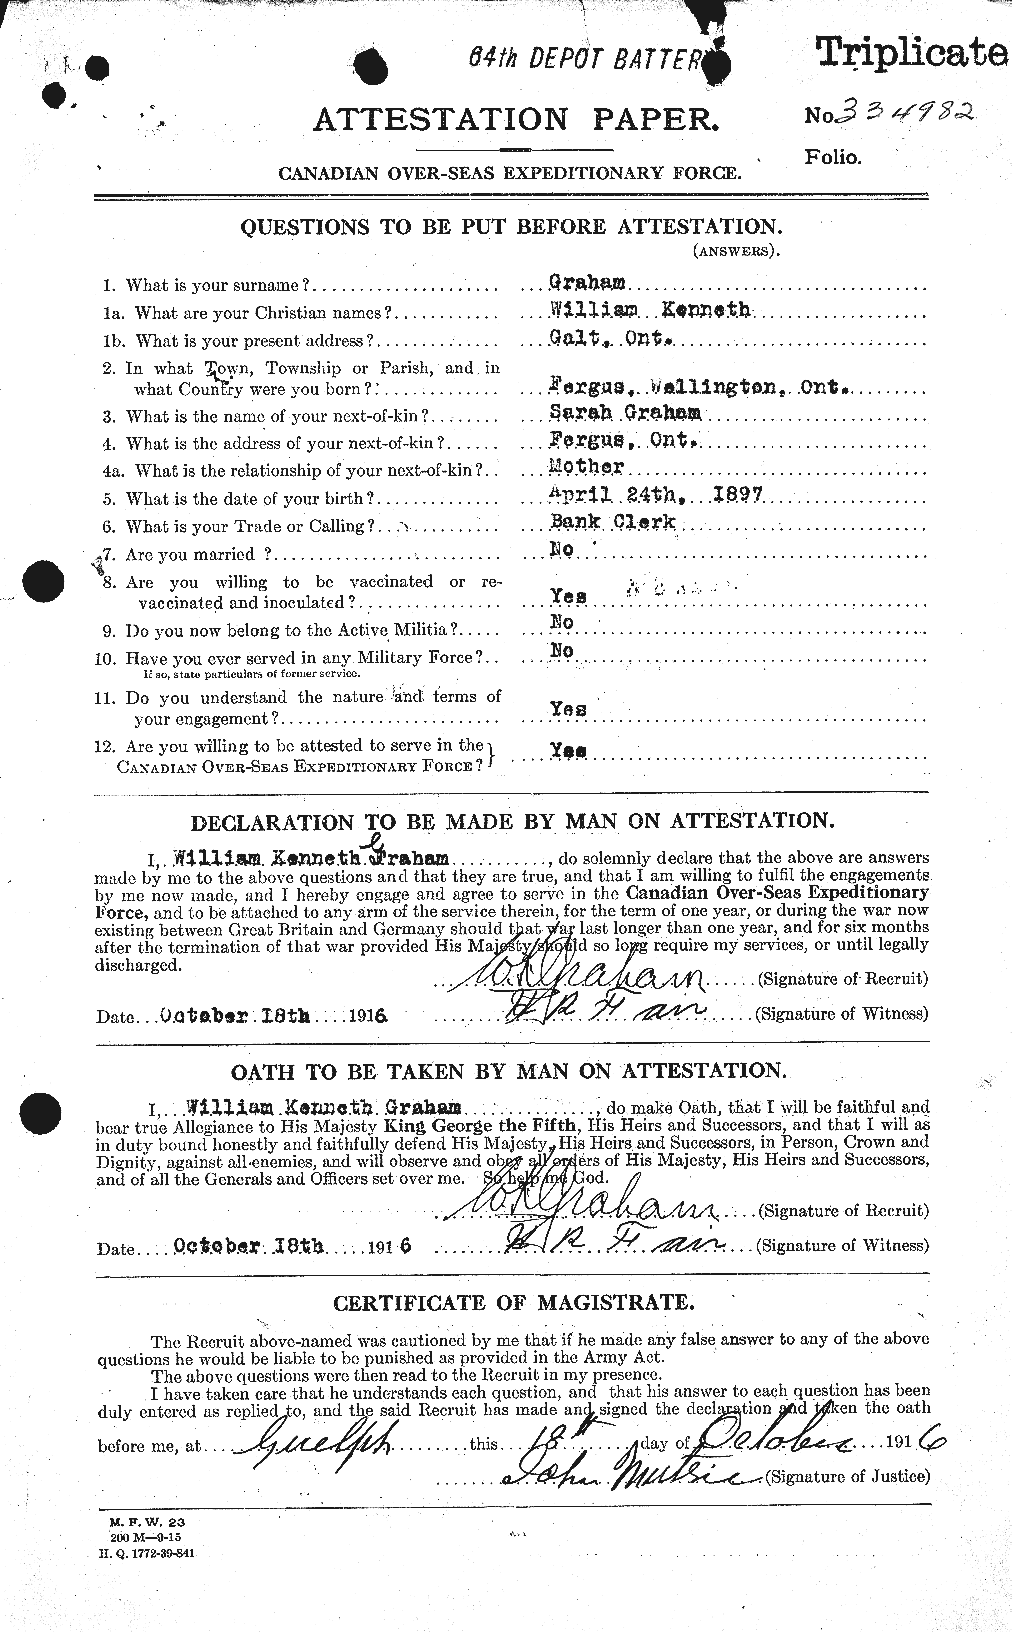 Personnel Records of the First World War - CEF 358018a